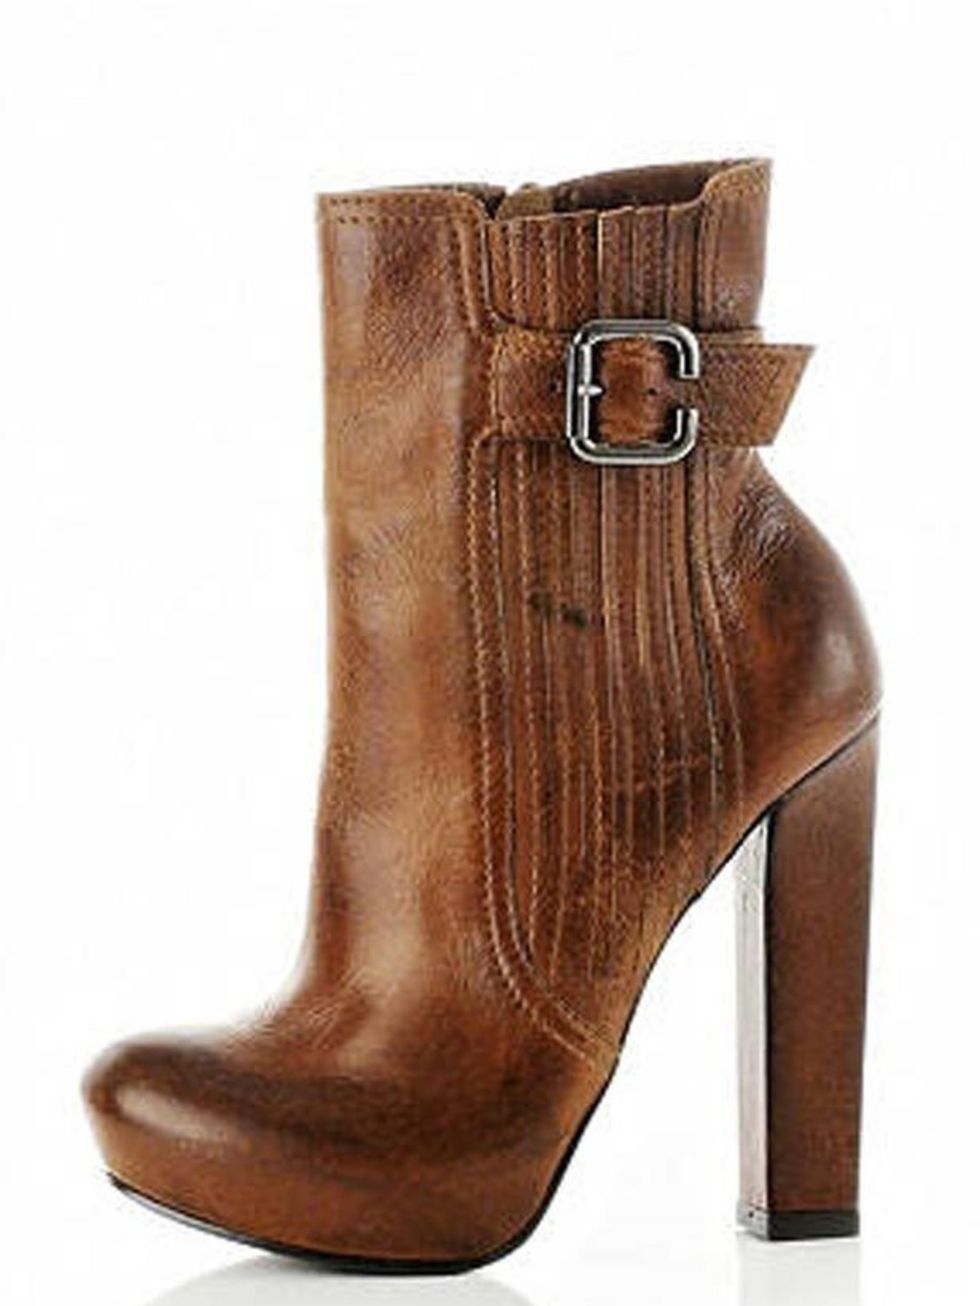 <p>Cool, sky high and a little bit Wang, these ankle boots are sure to sell out. <a href="http://www.riverisland.com/Online/women/shoes--boots/boots/brownpanelledankleboots-596518">River Island</a> leather ankle boots, £94.99 </p>